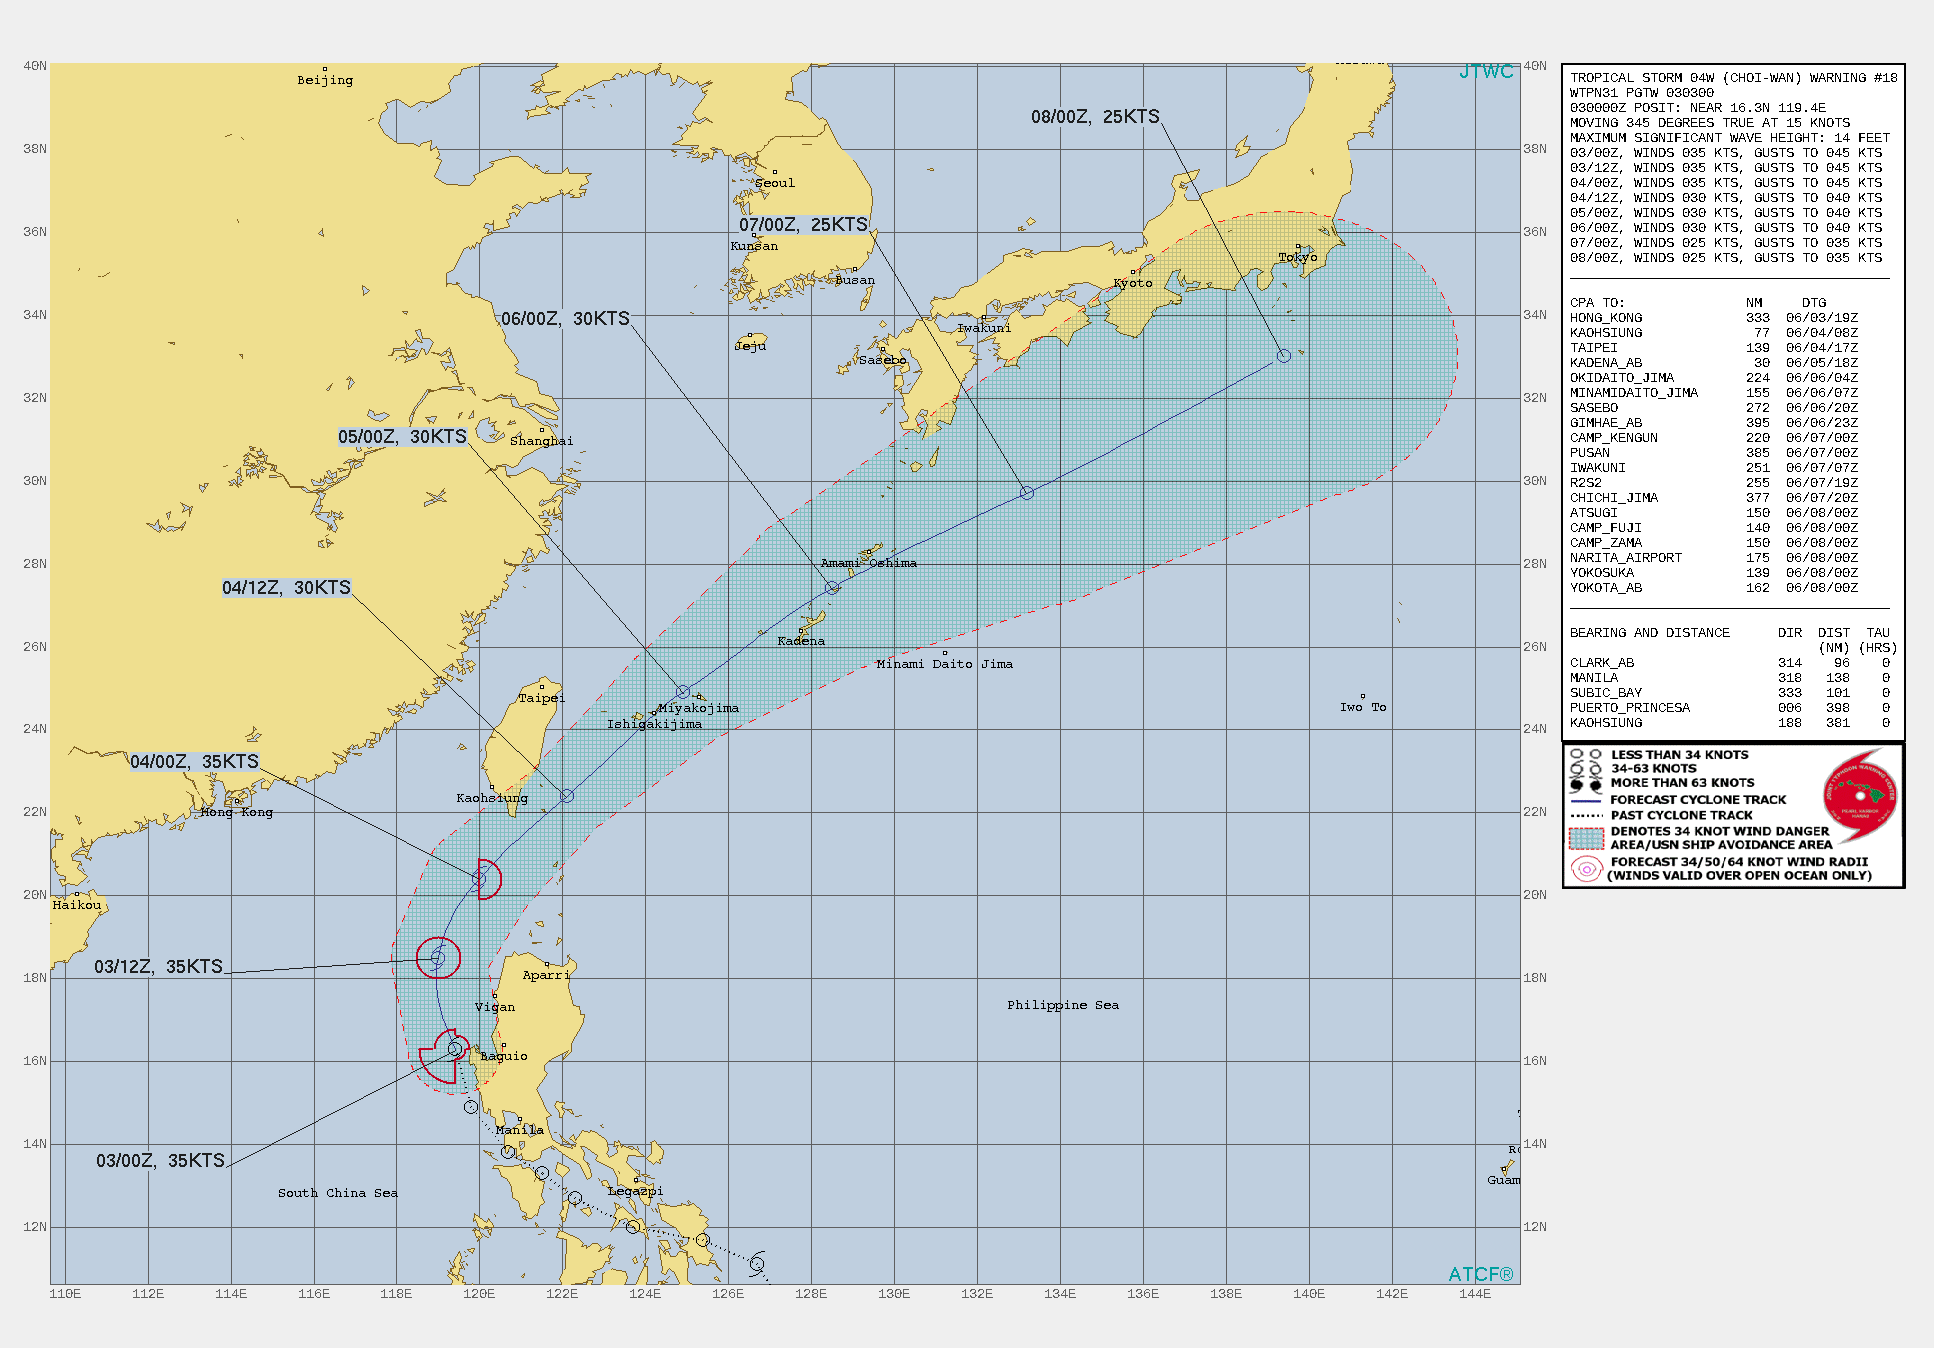 TS 04W. WARNING 18 ISSUED AT 03/03UTC.THE SYSTEM IS IN A MARGINAL ENVIRONMENT WITH GOOD  WESTWARD AND EQUATORWARD OUTFLOW AND VERY WARM (30-31C) SEA SURFACE  TEMPERATURES, OFFSET BY MODERATE TO STRONG (20-25KT) VERTICAL WIND  SHEAR(VWS) FROM THE NORTHEAST. THE CYCLONE IS TRACKING ALONG THE WESTERN  PERIPHERY OF THE SUBTROPICAL RIDGE (STR) TO THE EAST-NORTHEAST.  TS 04W WILL CONTINUE TO TRACK NORTH-NORTHWESTWARD OVER THE  NEXT 12 HOURS, MAKING THE TURN NORTH-NORTHEASTWARD THEN  NORTHEASTWARD AFTER 12H UNDER THE STEERING INFLUENCE OF THE STR.  THE SYSTEM IS FORECAST TO REMAIN AT 35KNOTS UNDER THE AFOREMENTIONED  MARGINAL CONDITIONS AS IT ROUNDS THE RIDGE AXIS. BY 36H, TS 04W  WILL WEAKEN TO 30 KNOTS DUE TO INCREASING VWS ASSOCIATED WITH STRONG  NORTHEASTERLY FLOW FROM A SECONDARY STR ANCHORED OVER SOUTHEASTERN  CHINA. THE SYSTEM WILL REMAIN AT 30 KNOTS AS IT PASSES NORTH OF KADENA  AIR BASE BEFORE 48H AND UP TO 72H AS IT CONTINUES  NORTHEASTWARD. AFTER 72H, TS CHOI-WAN WILL ACCELERATE NORTHEASTWARD ON THE  POLEWARD SIDE OF THE STEERING STR. CONCURRENTLY BY 96H, IT WILL  BEGIN EXTRA-TROPICAL TRANSITION (ETT) AS IT ENTERS THE BAROCLINIC  ZONE AND WILL COMPLETE ETT SOUTH OF YOKOSUKA, JAPAN, BY 120H.  THERE IS A DISTINCT POSSIBILITY THAT TS 04W WILL DISSIPATE BEFORE  ETT.